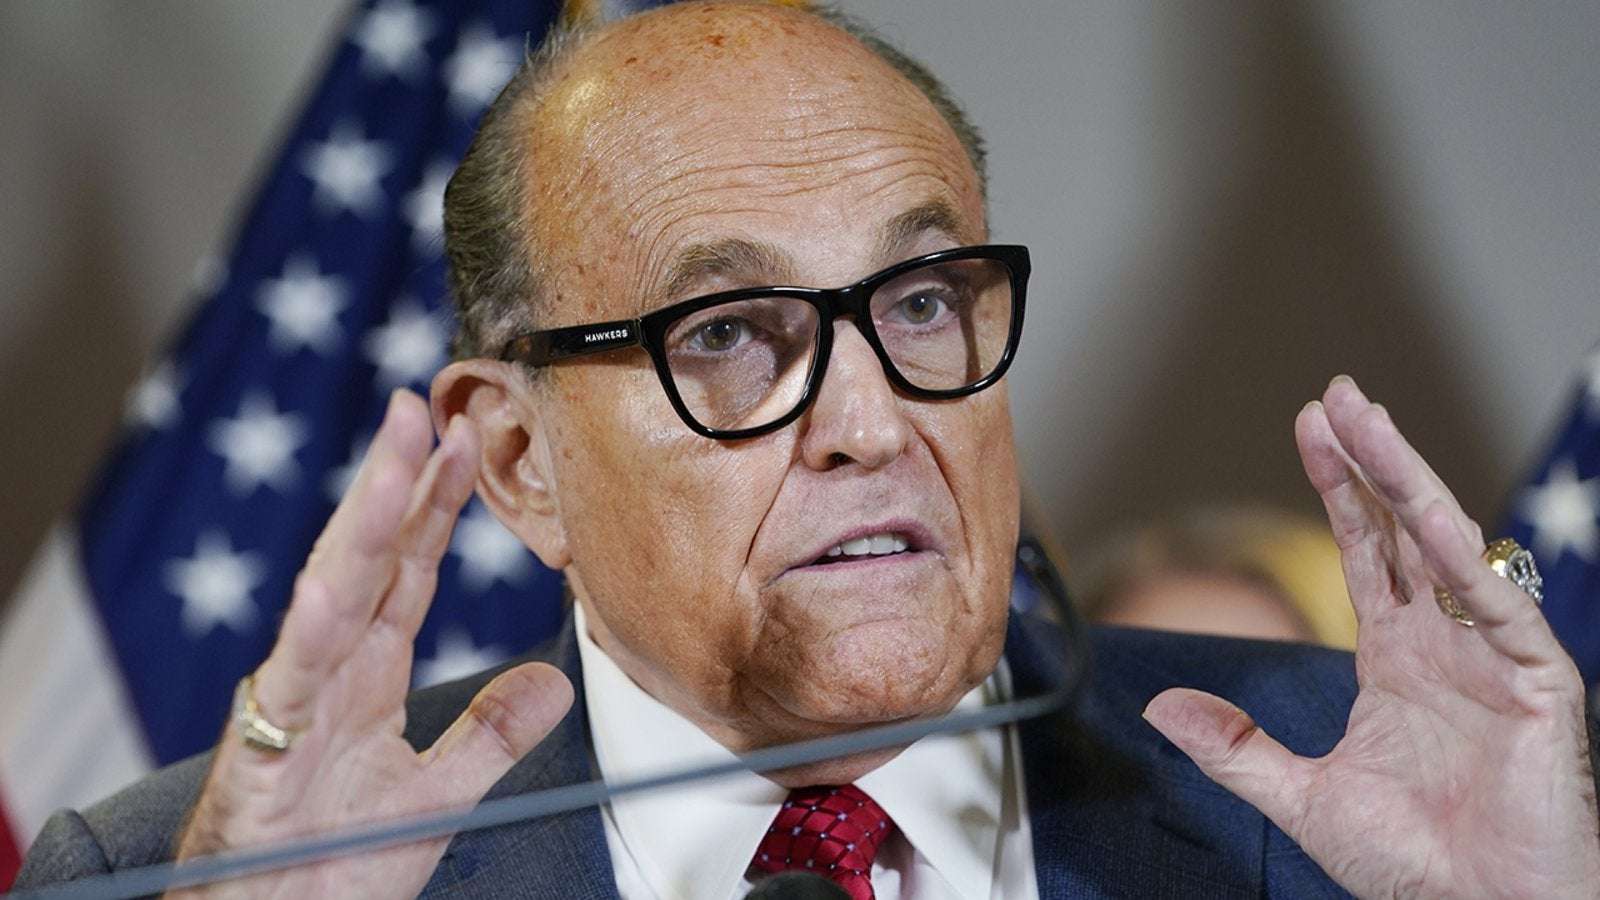 image for Rudy Giuliani informed he is now 'target' in Georgia 2020 election probe